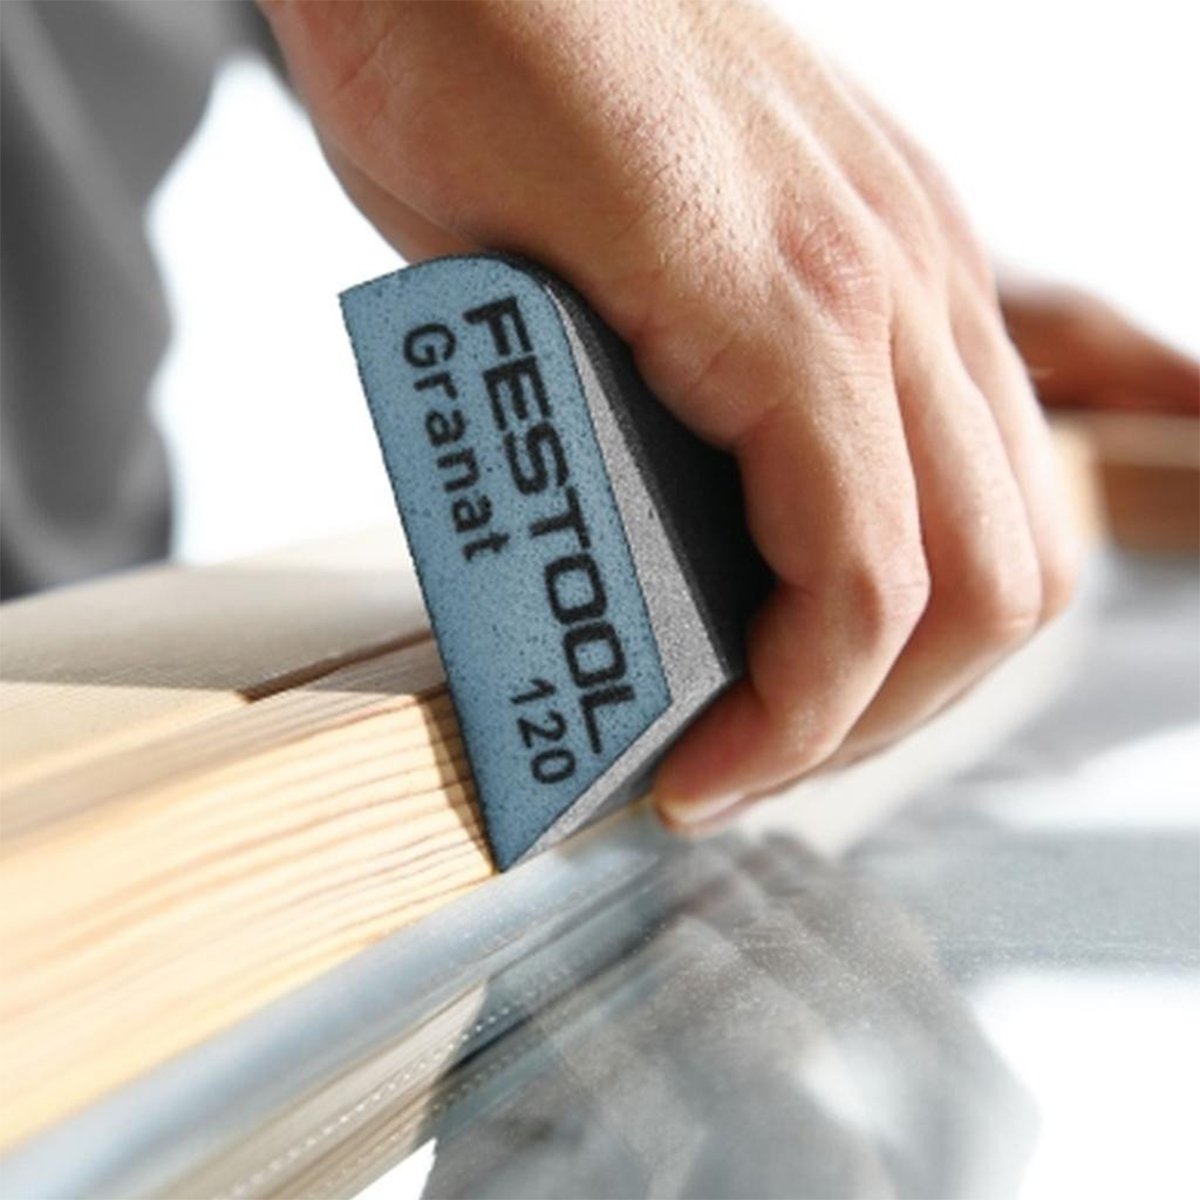 The combi sanding block has a bevelled and radiused edge for sanding tight corners and concave cove moulding profiles.